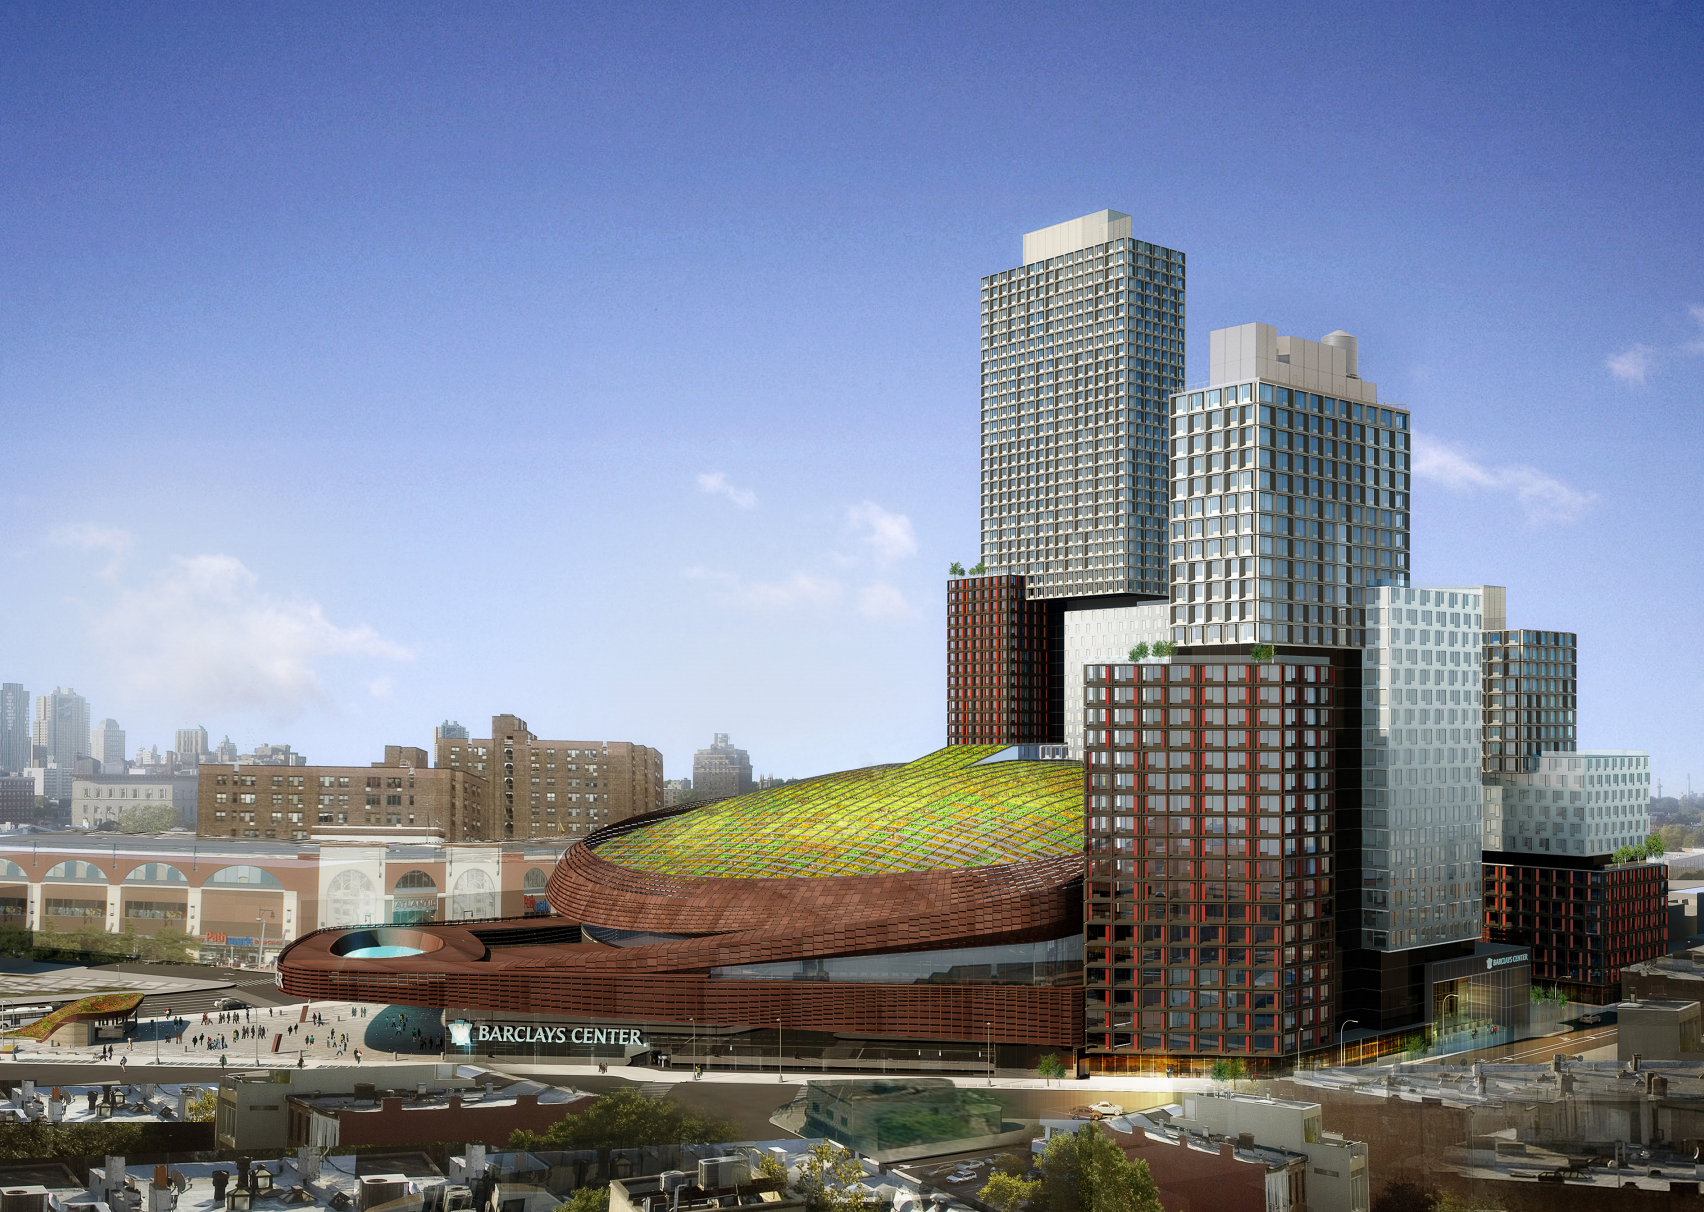 38 Sixth Avenue and the Barlcays Center, rendering by SHoP Architects